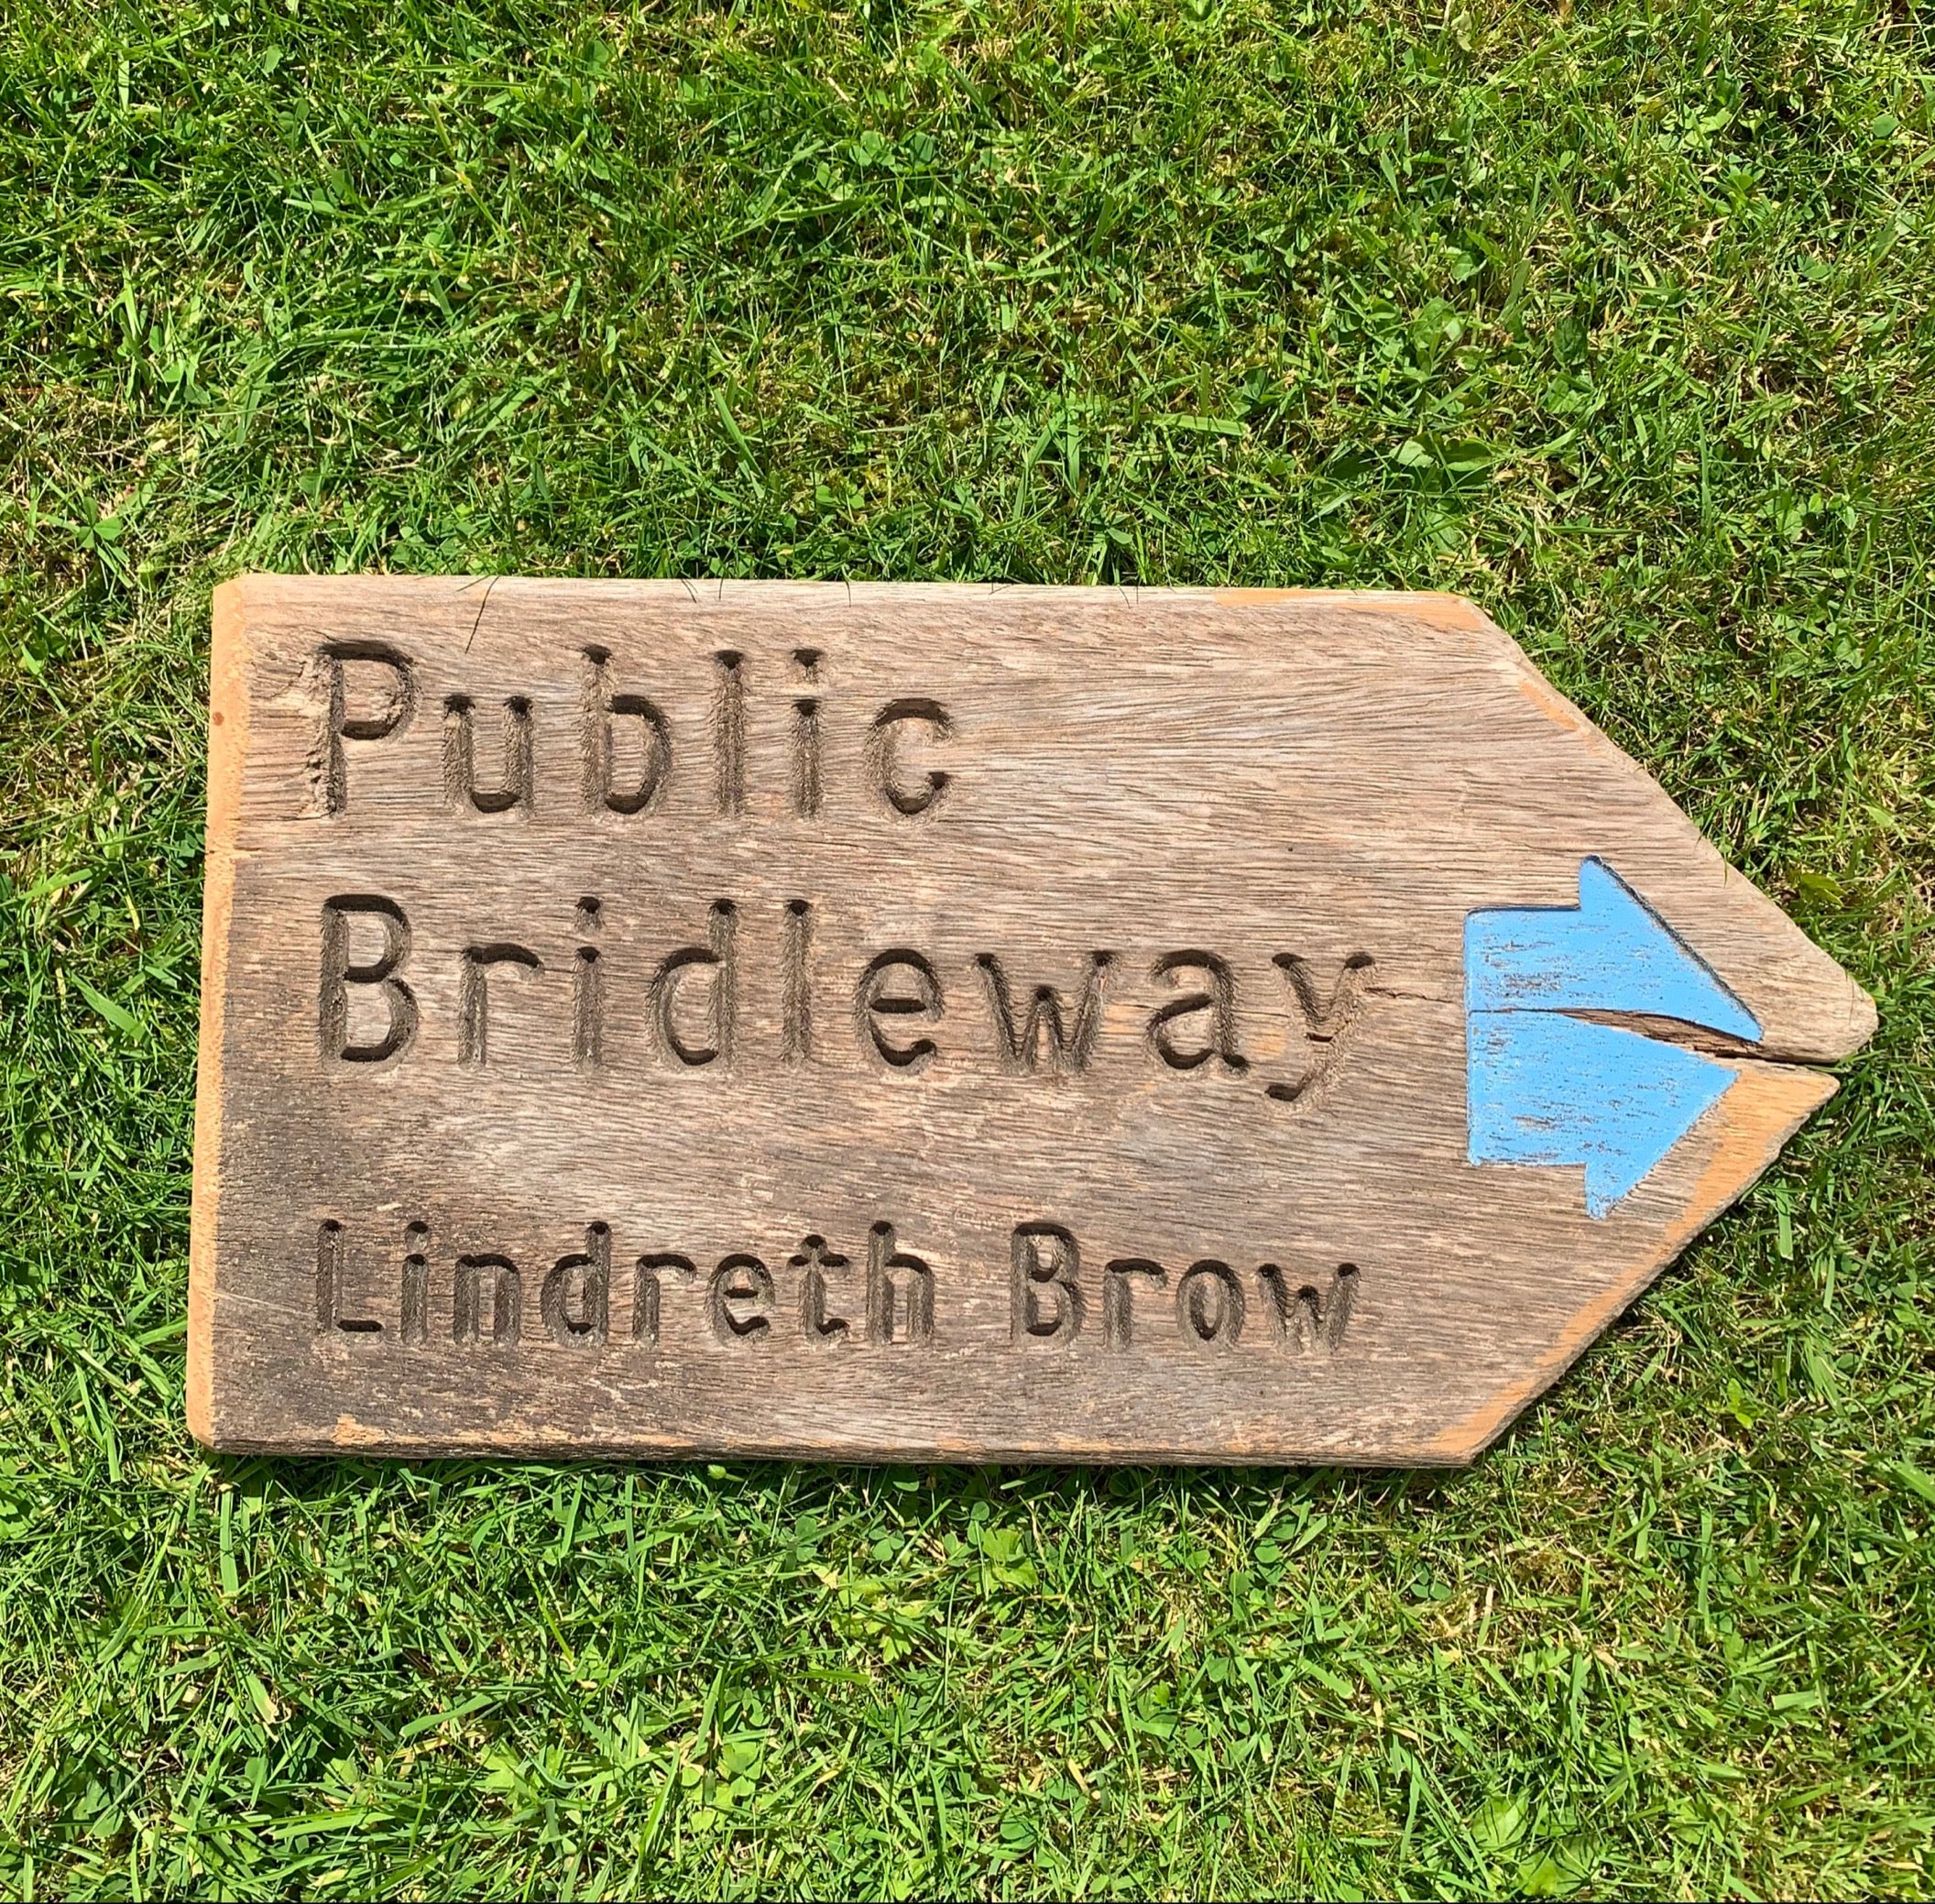 Trail Signs - Lindreth Brow